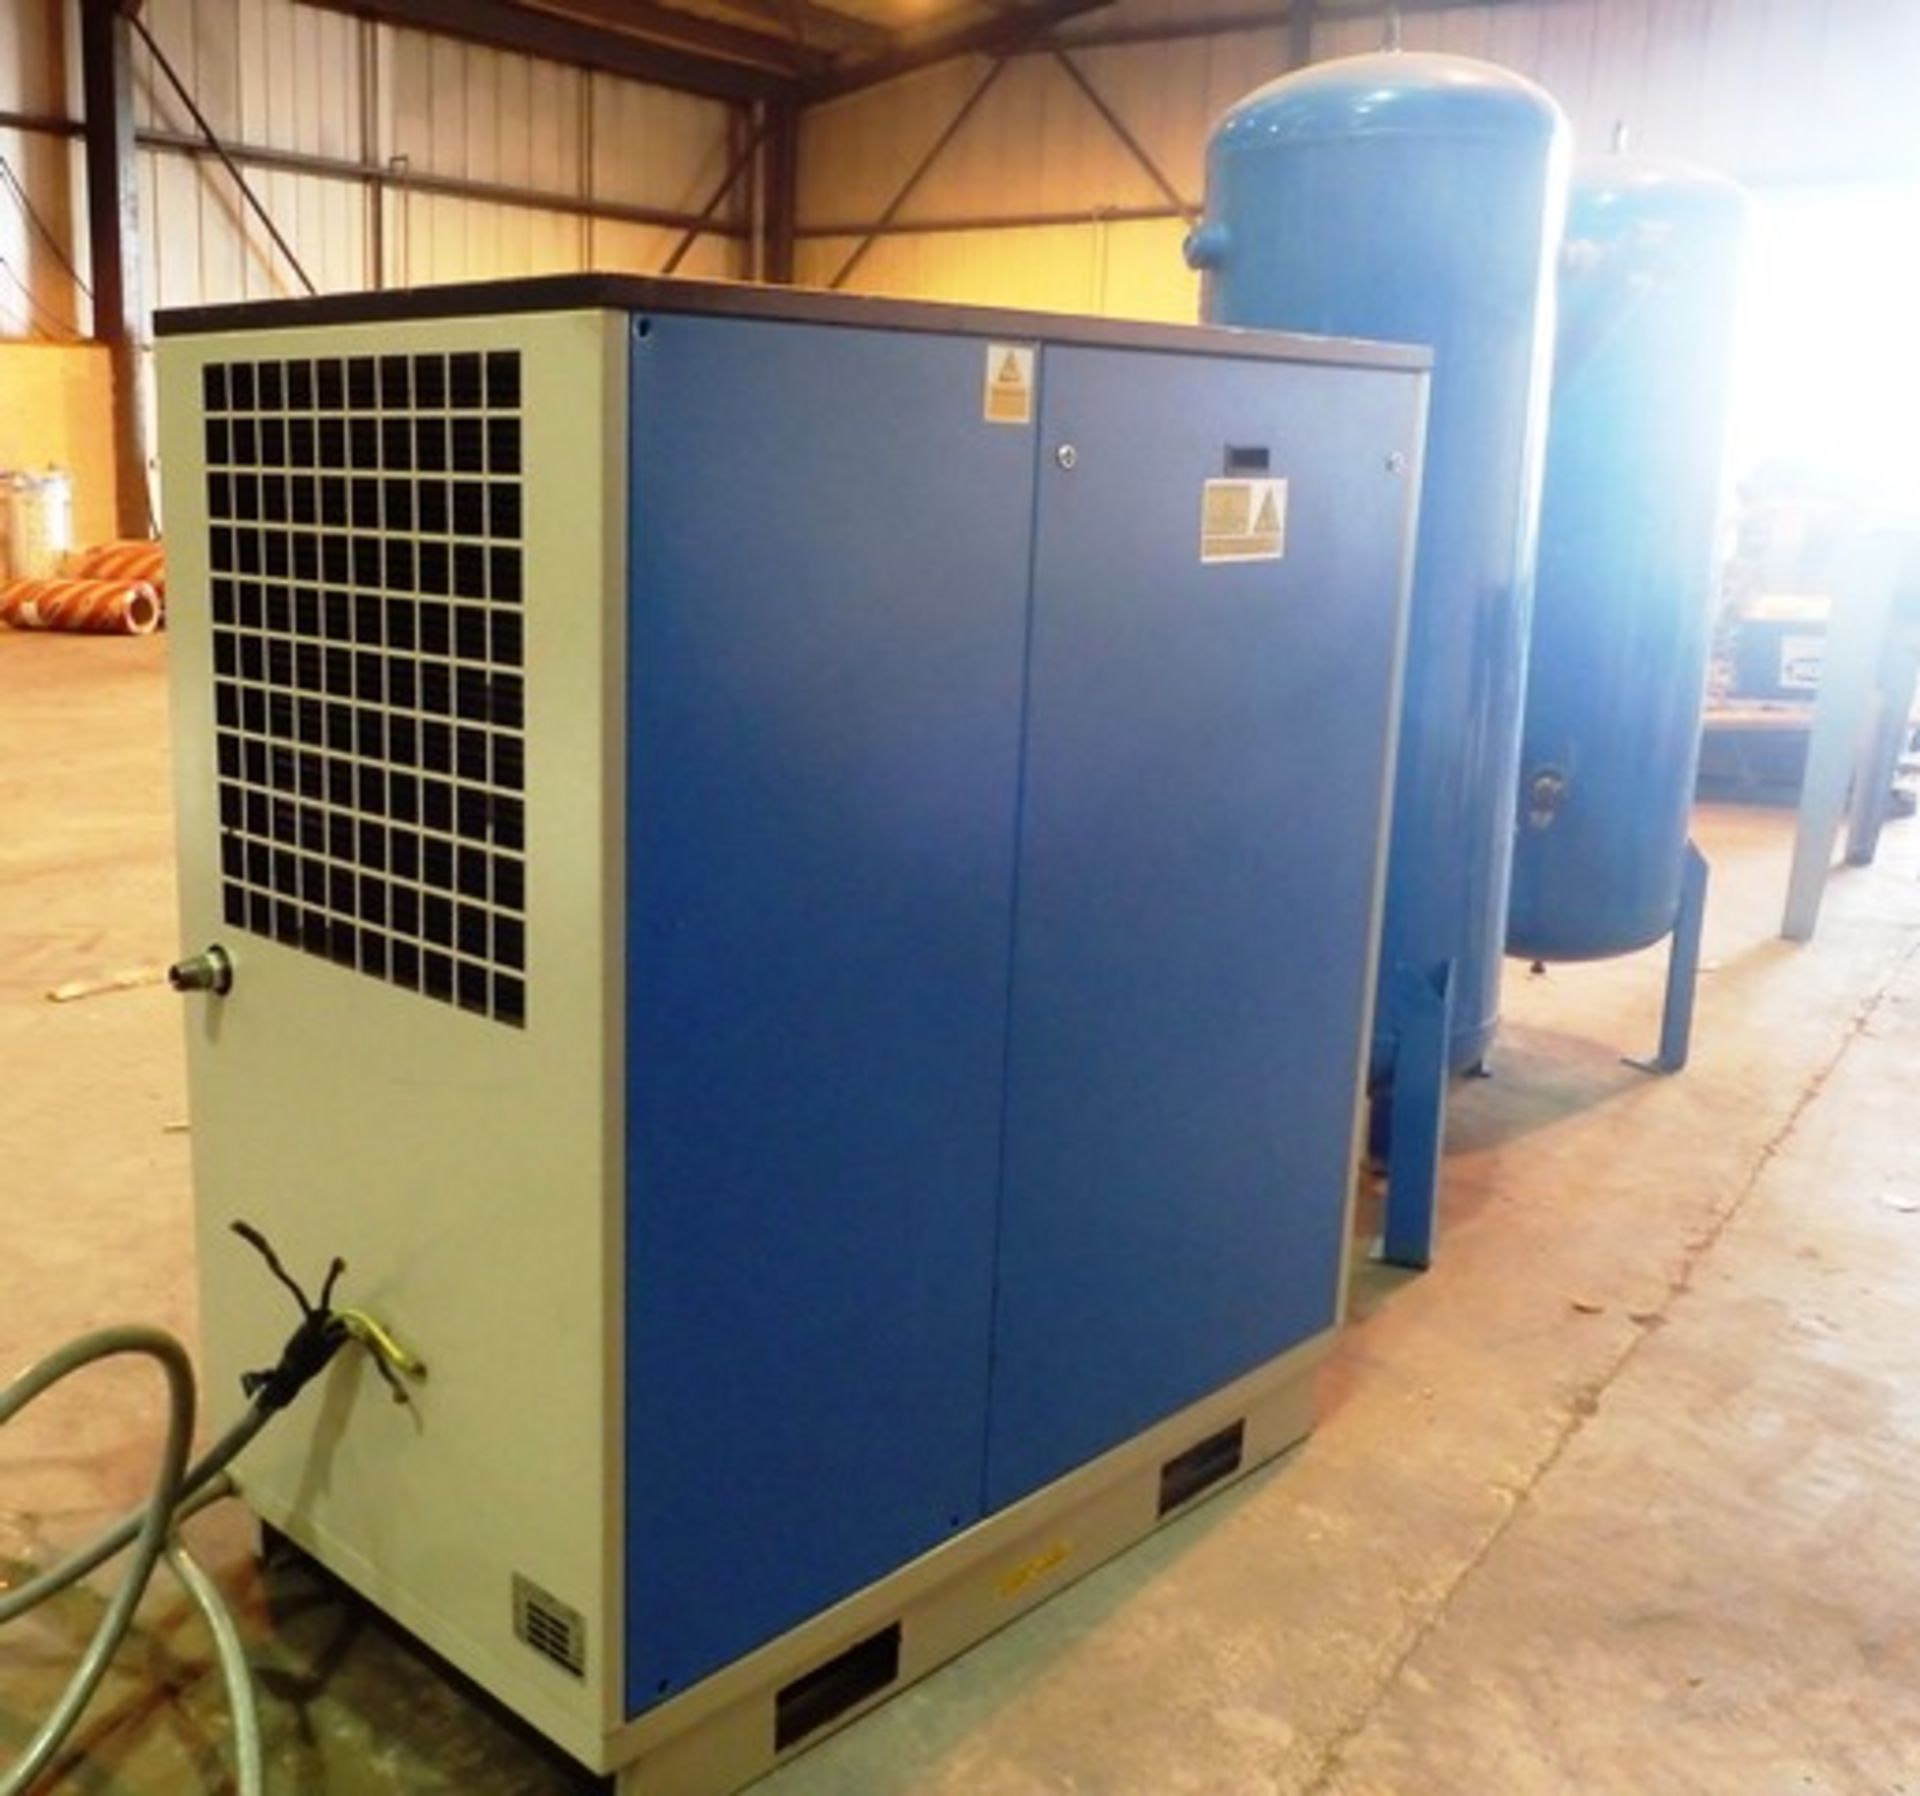 2007 SCREW COMPRESSOR MODEL VE3708CSE06 C/W 2 AIR TANKS.**DUE TO BUSINESS RE-ORGANISATION** - Image 4 of 8